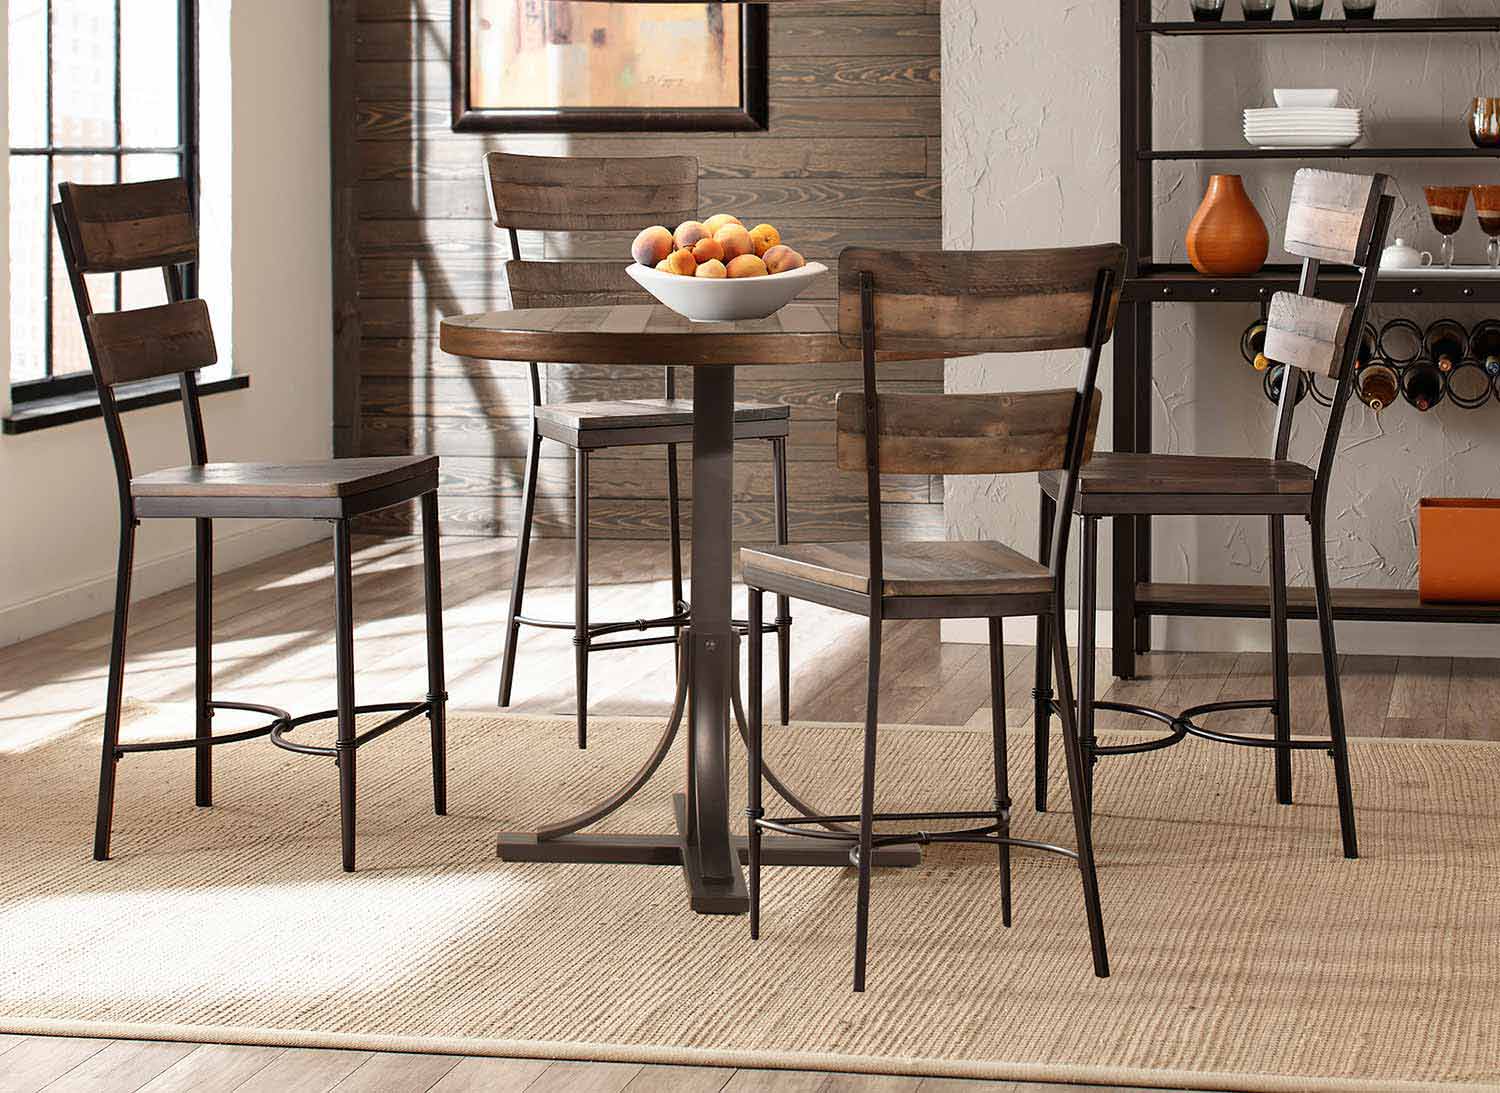 Hillsdale Jennings 5 Piece Counter Height Dining Set with Non-Swivel Counter Height Stools - Walnut Wood/Brown Metal